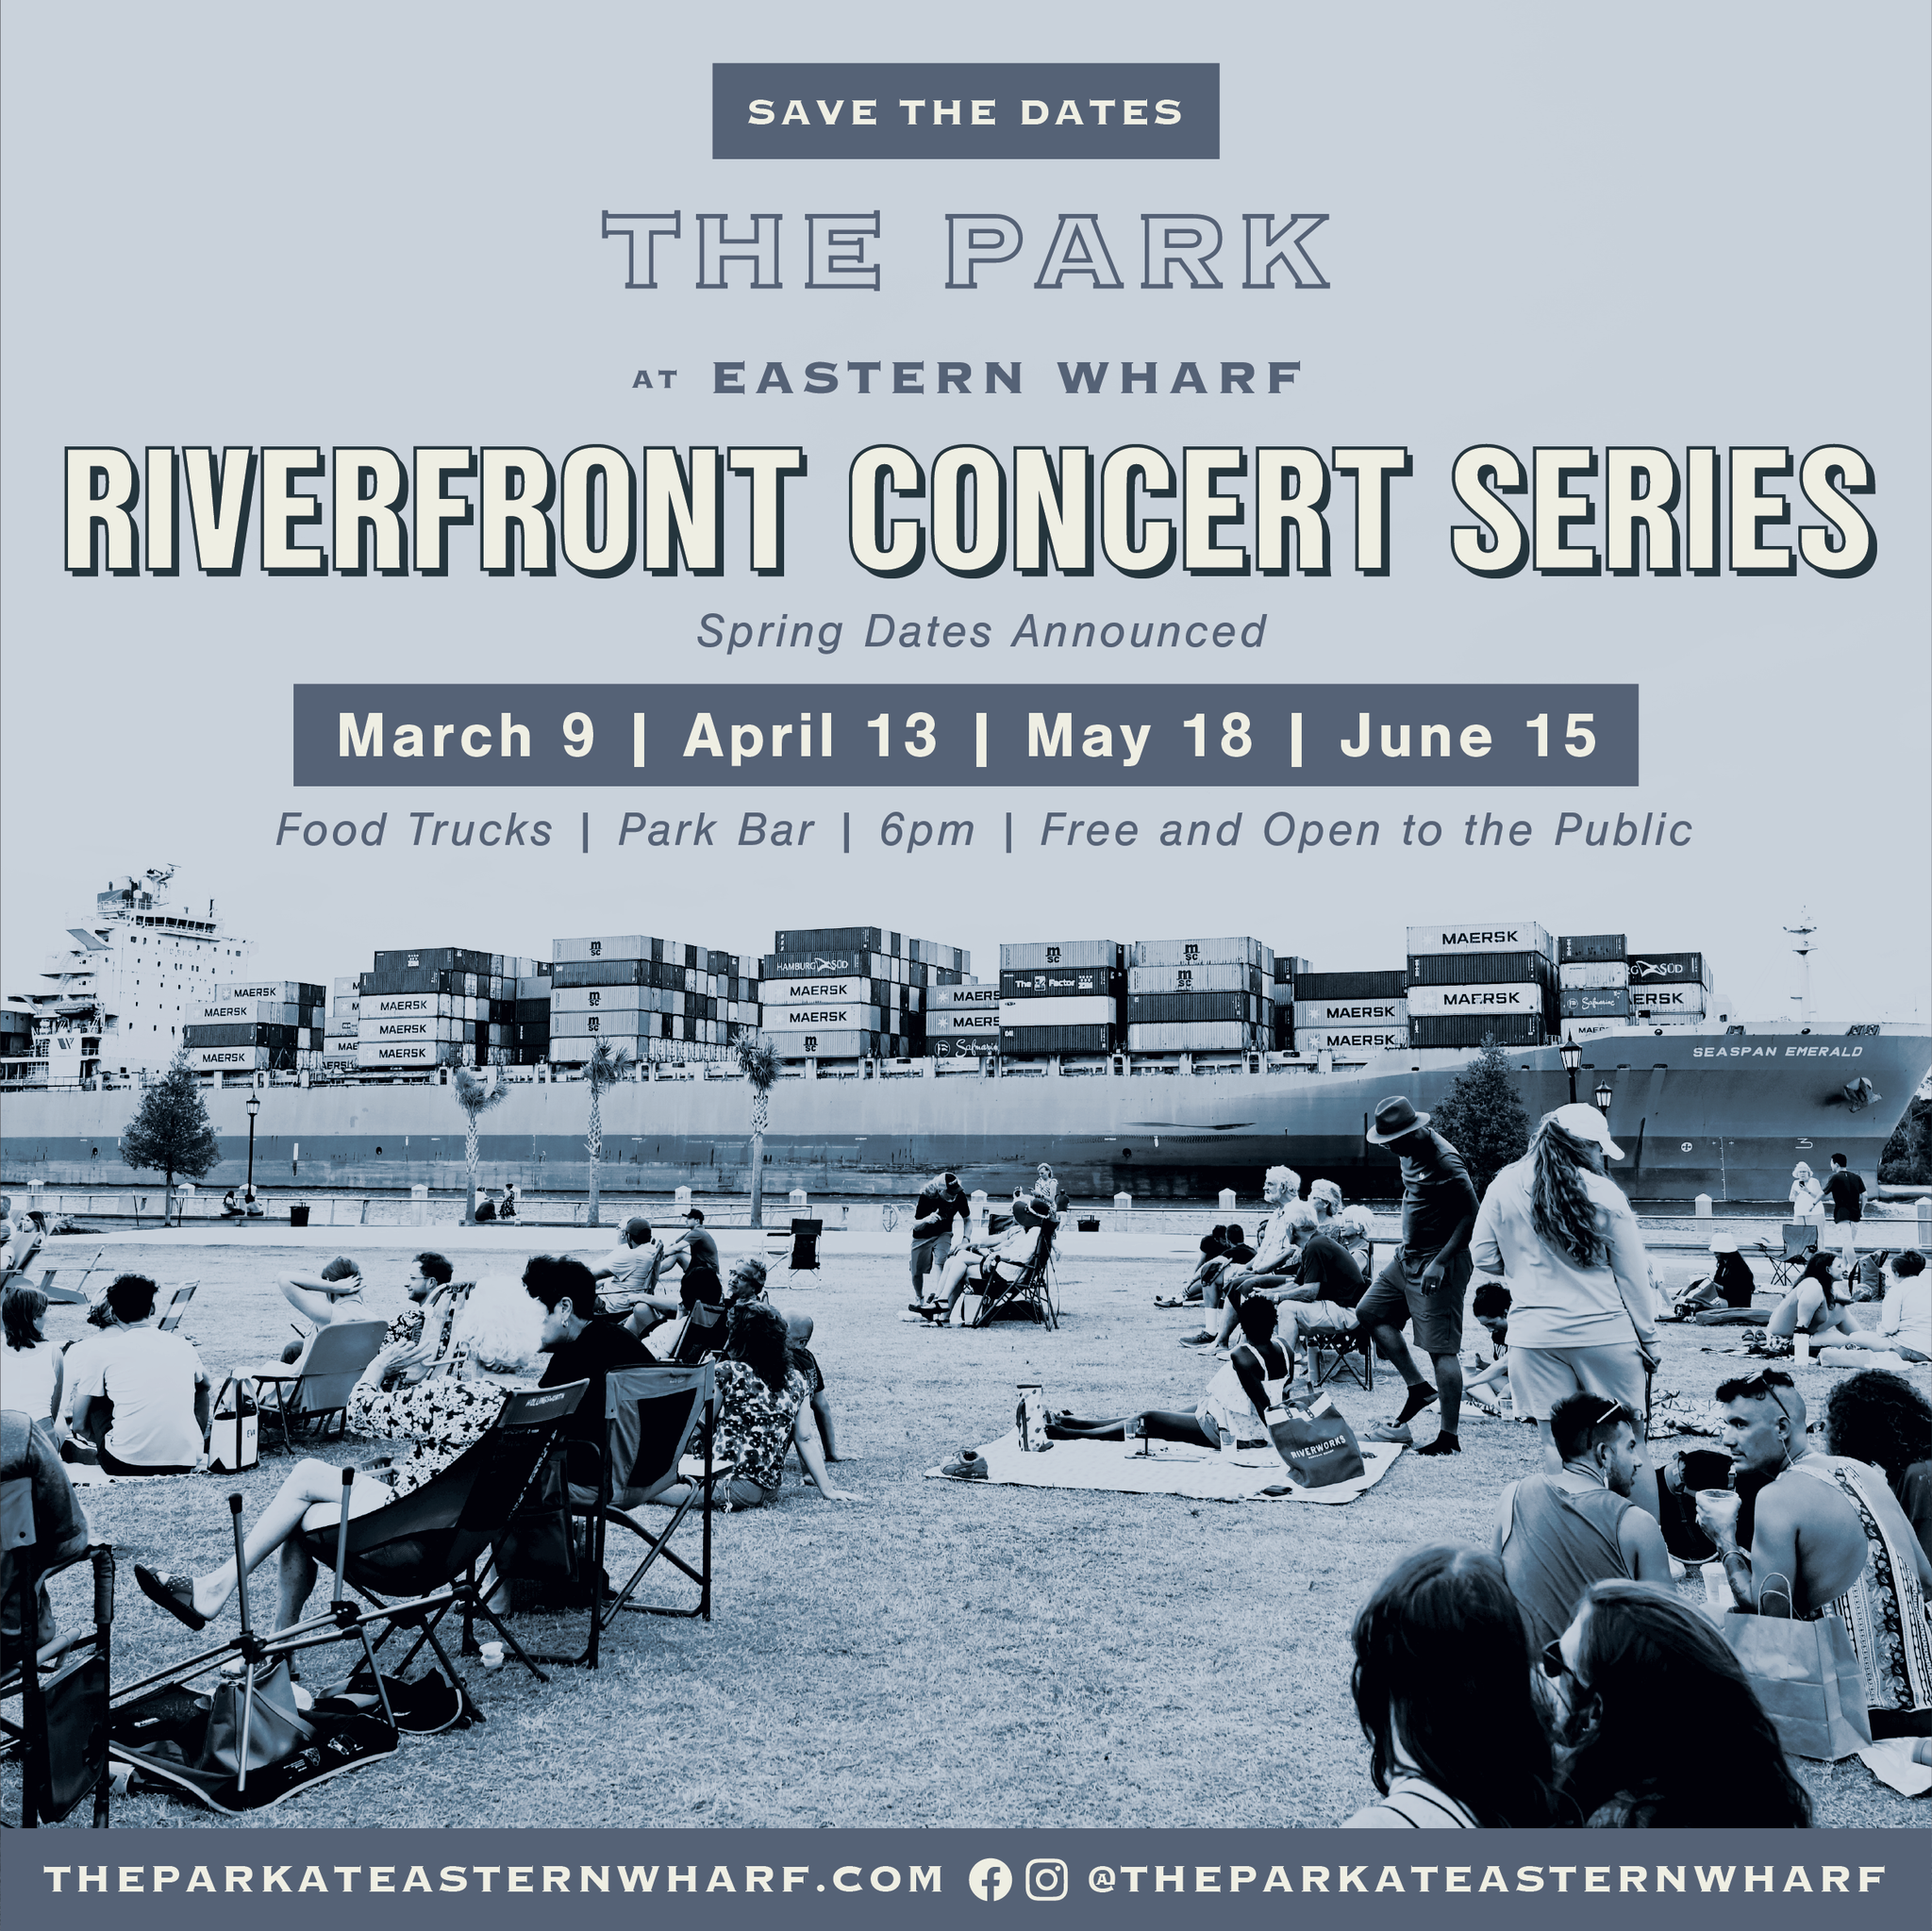 Riverfront Concert Series at The Park at Eastern Wharf